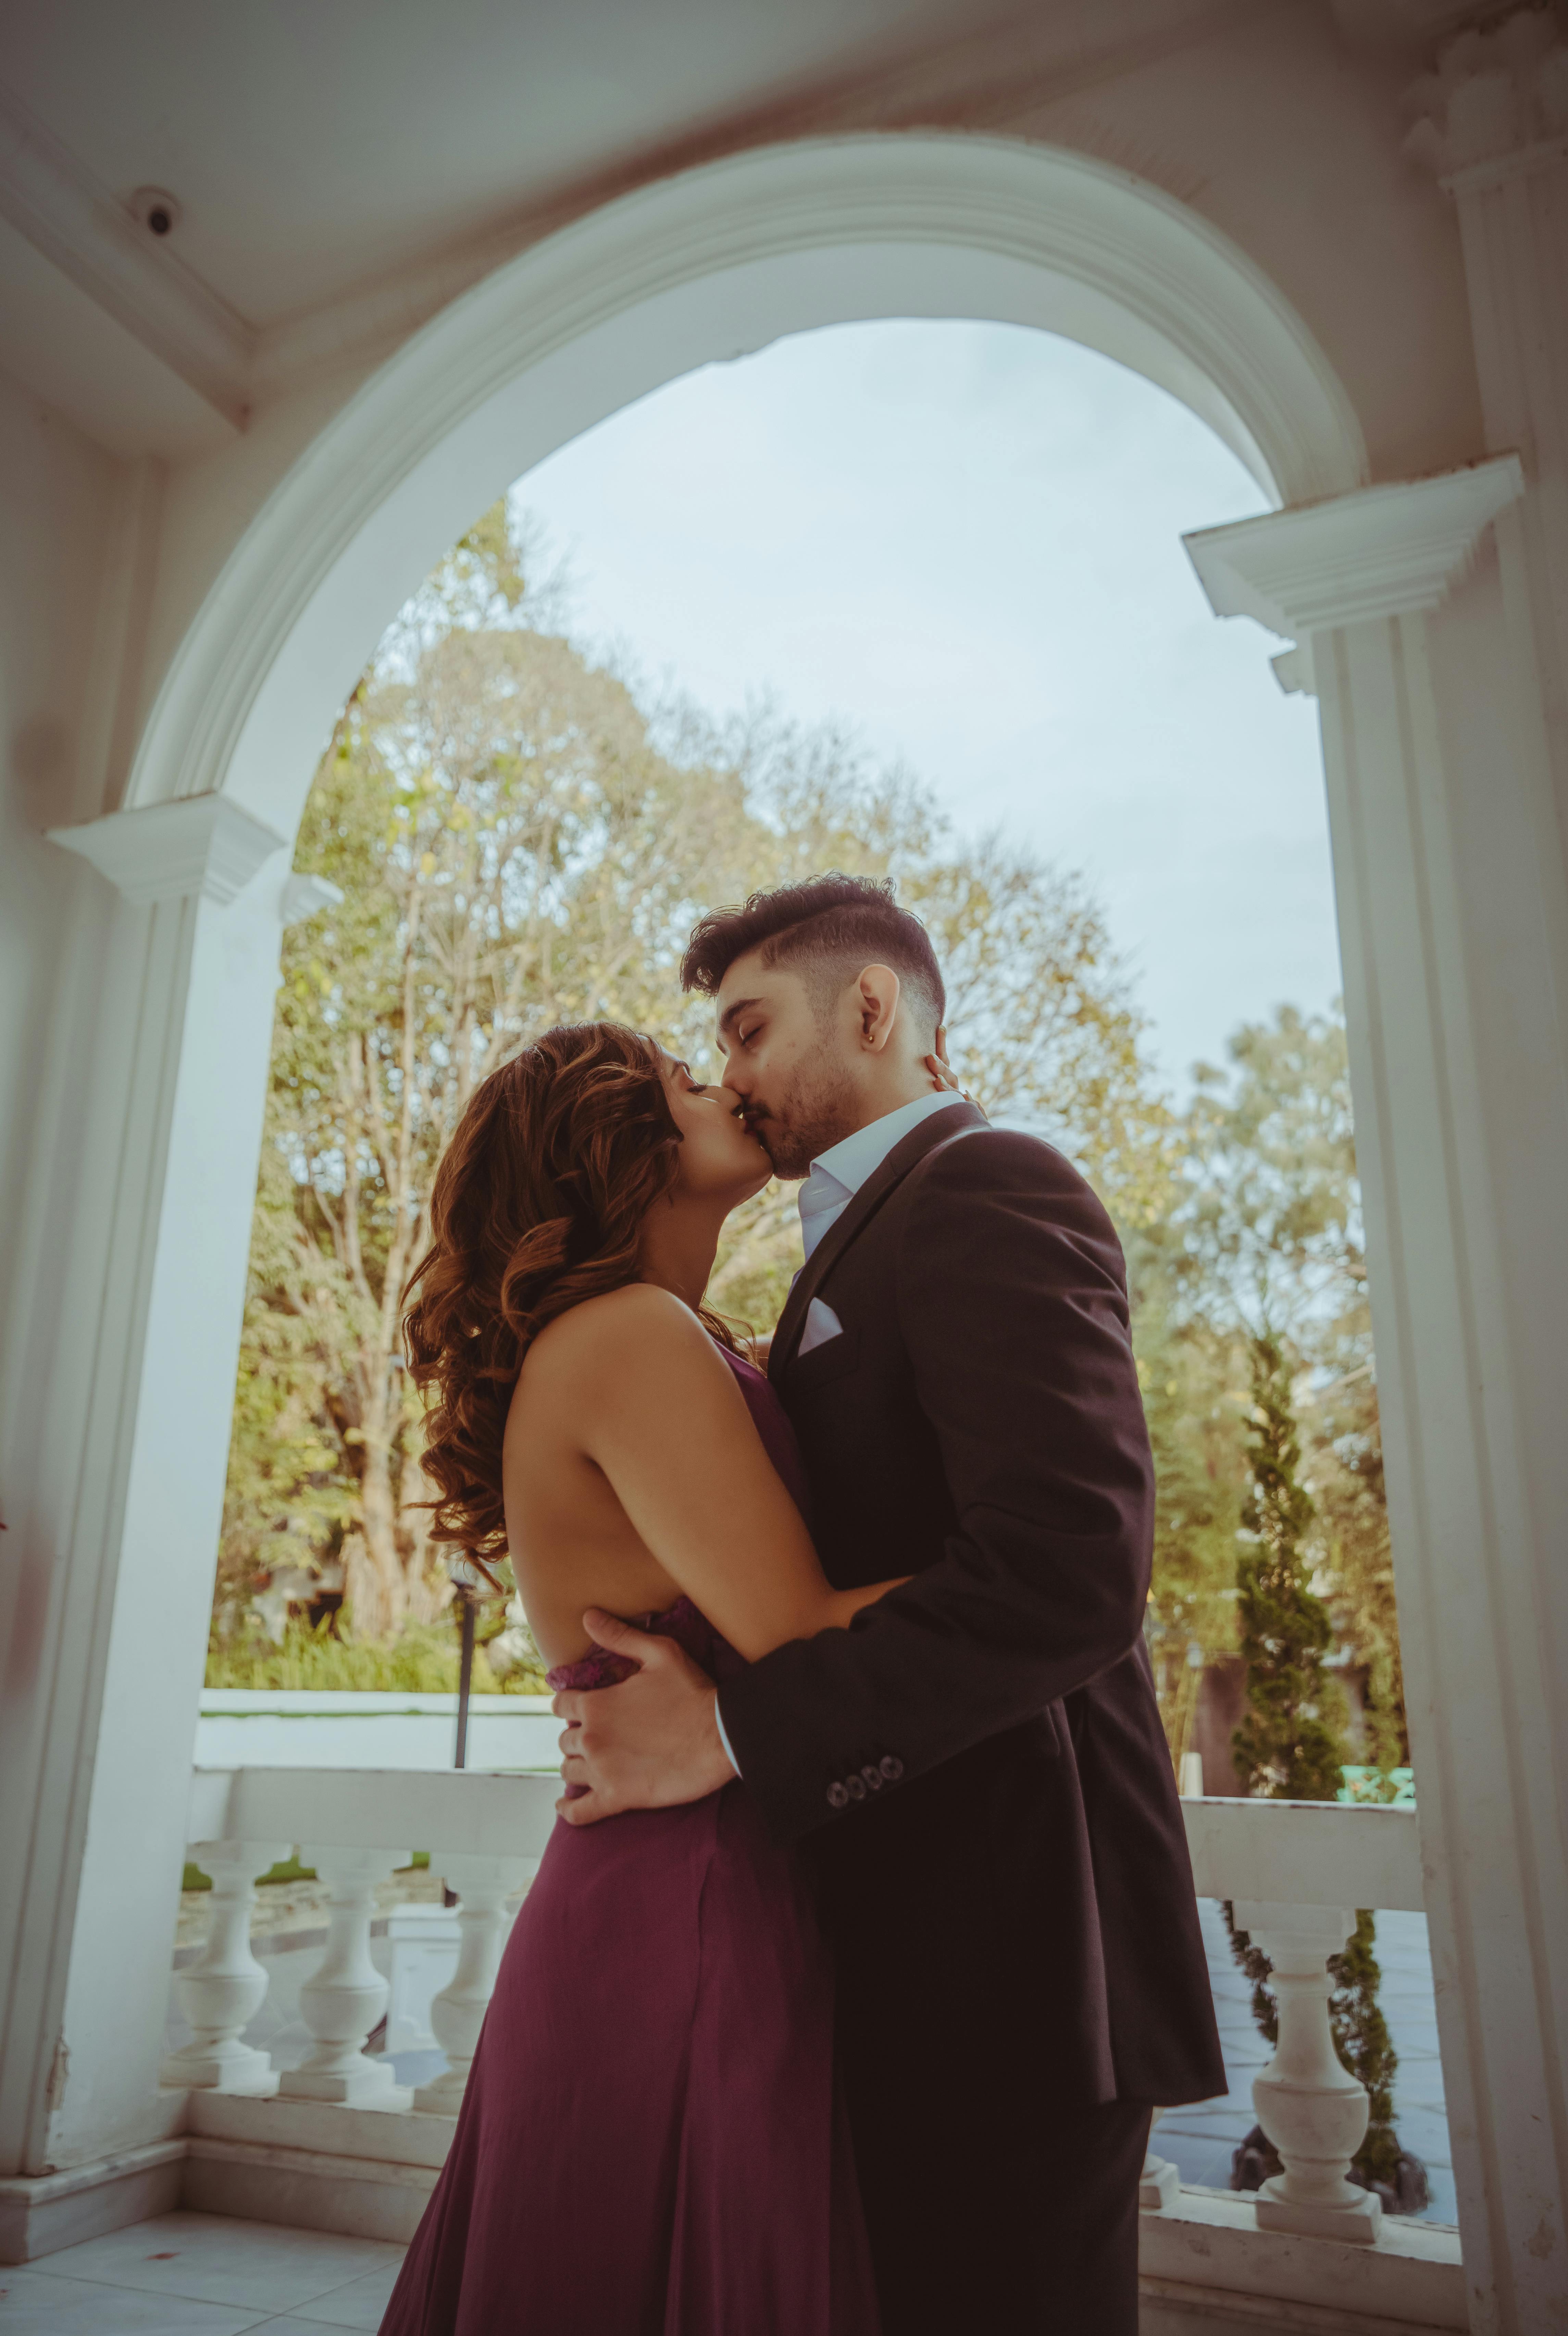 https://images.pexels.com/photos/15930871/pexels-photo-15930871/free-photo-of-photo-of-a-couple-kissing-under-an-arch.jpeg